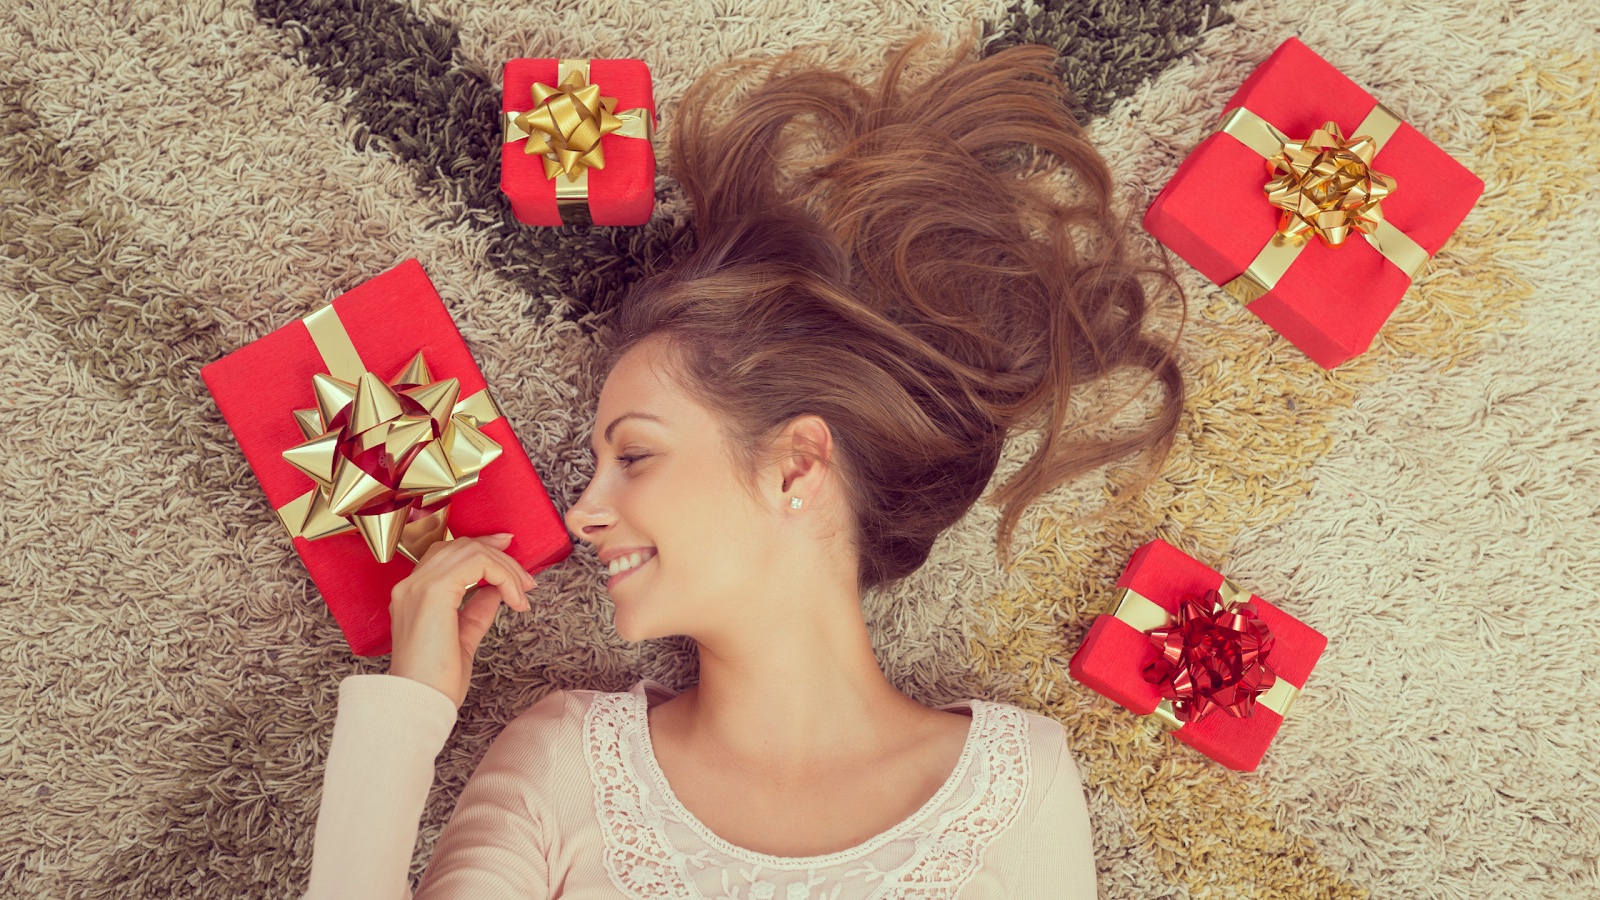 A woman with smooth skin lies in a pile of gifts, smiling.